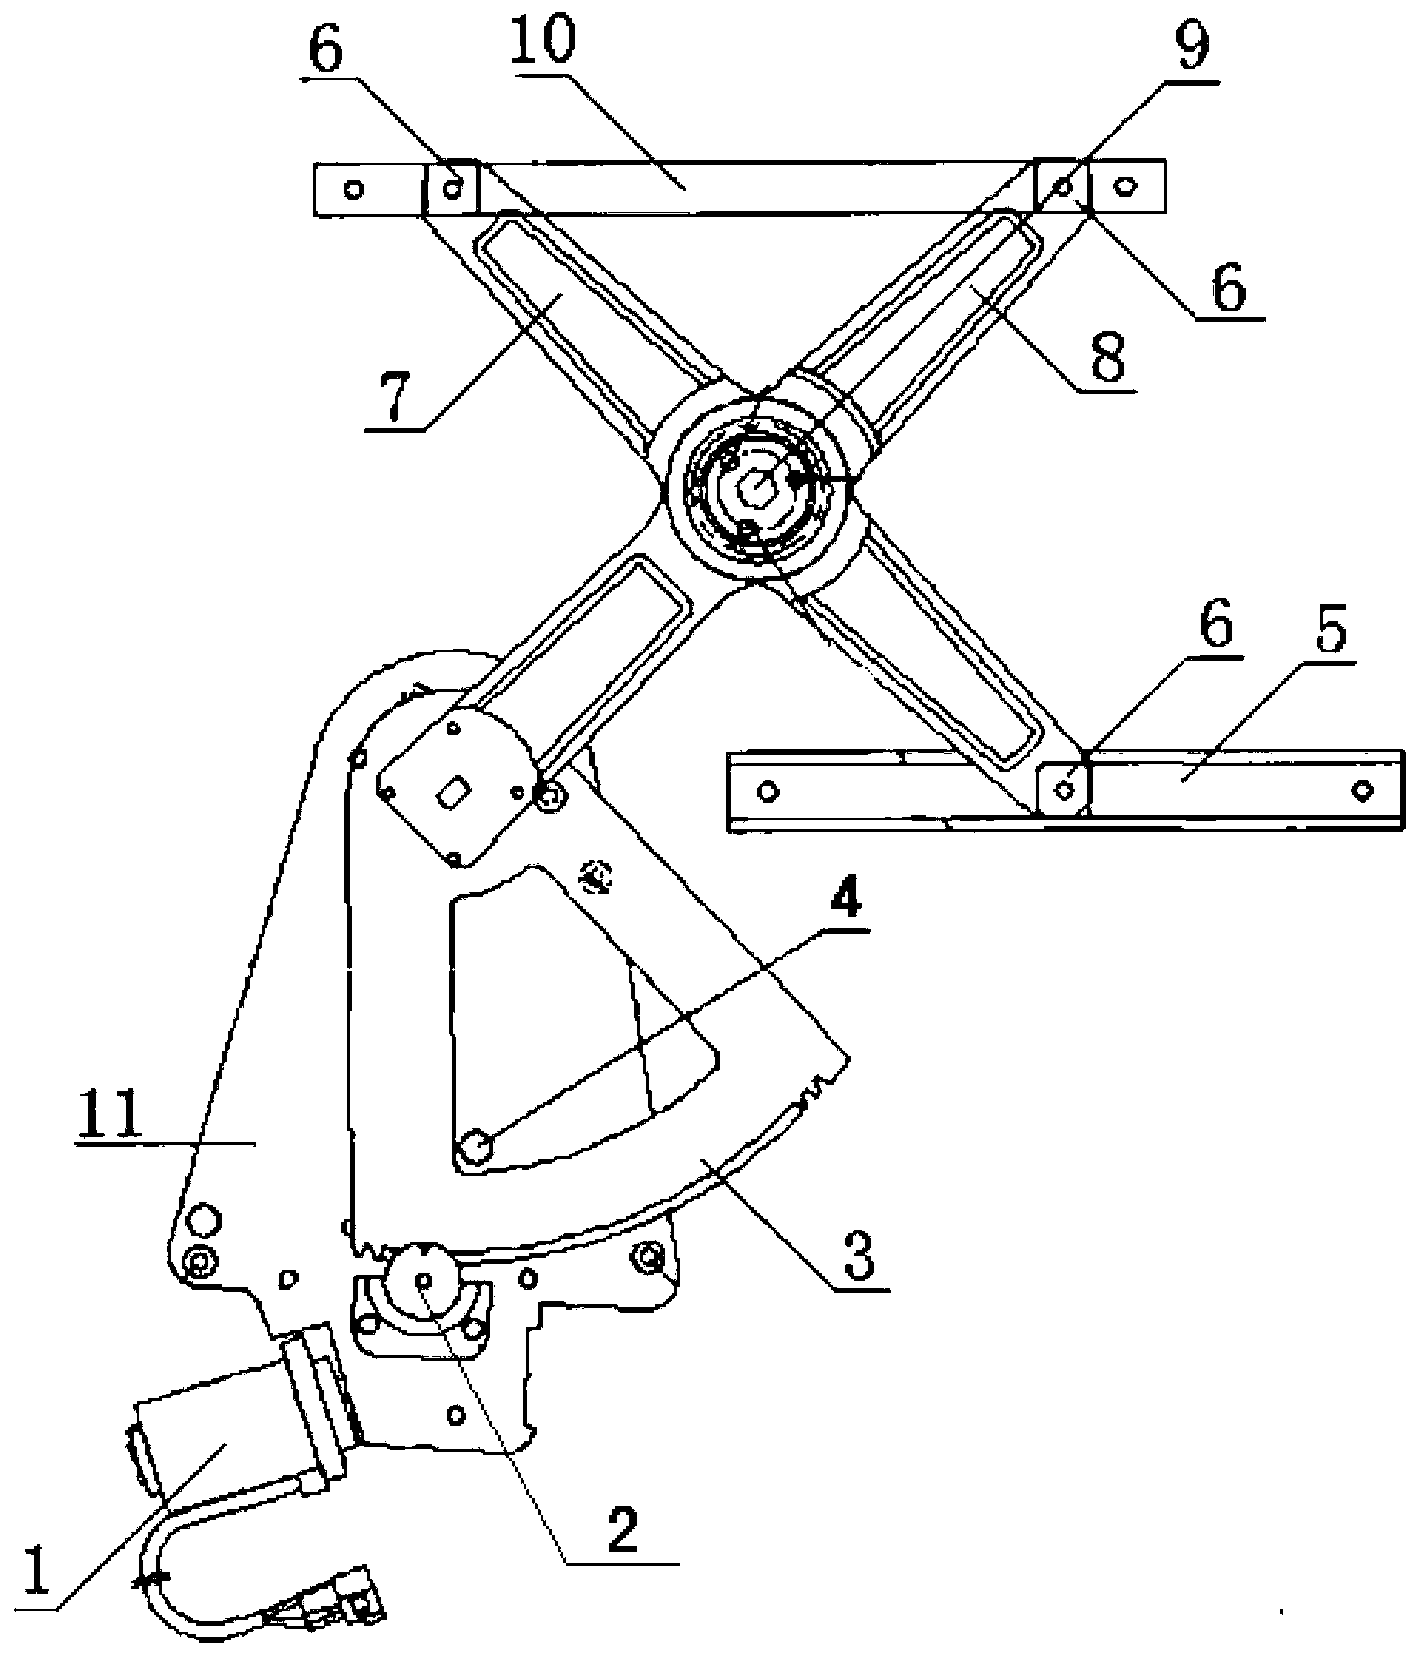 Glass lifter, automobile cab and automobile